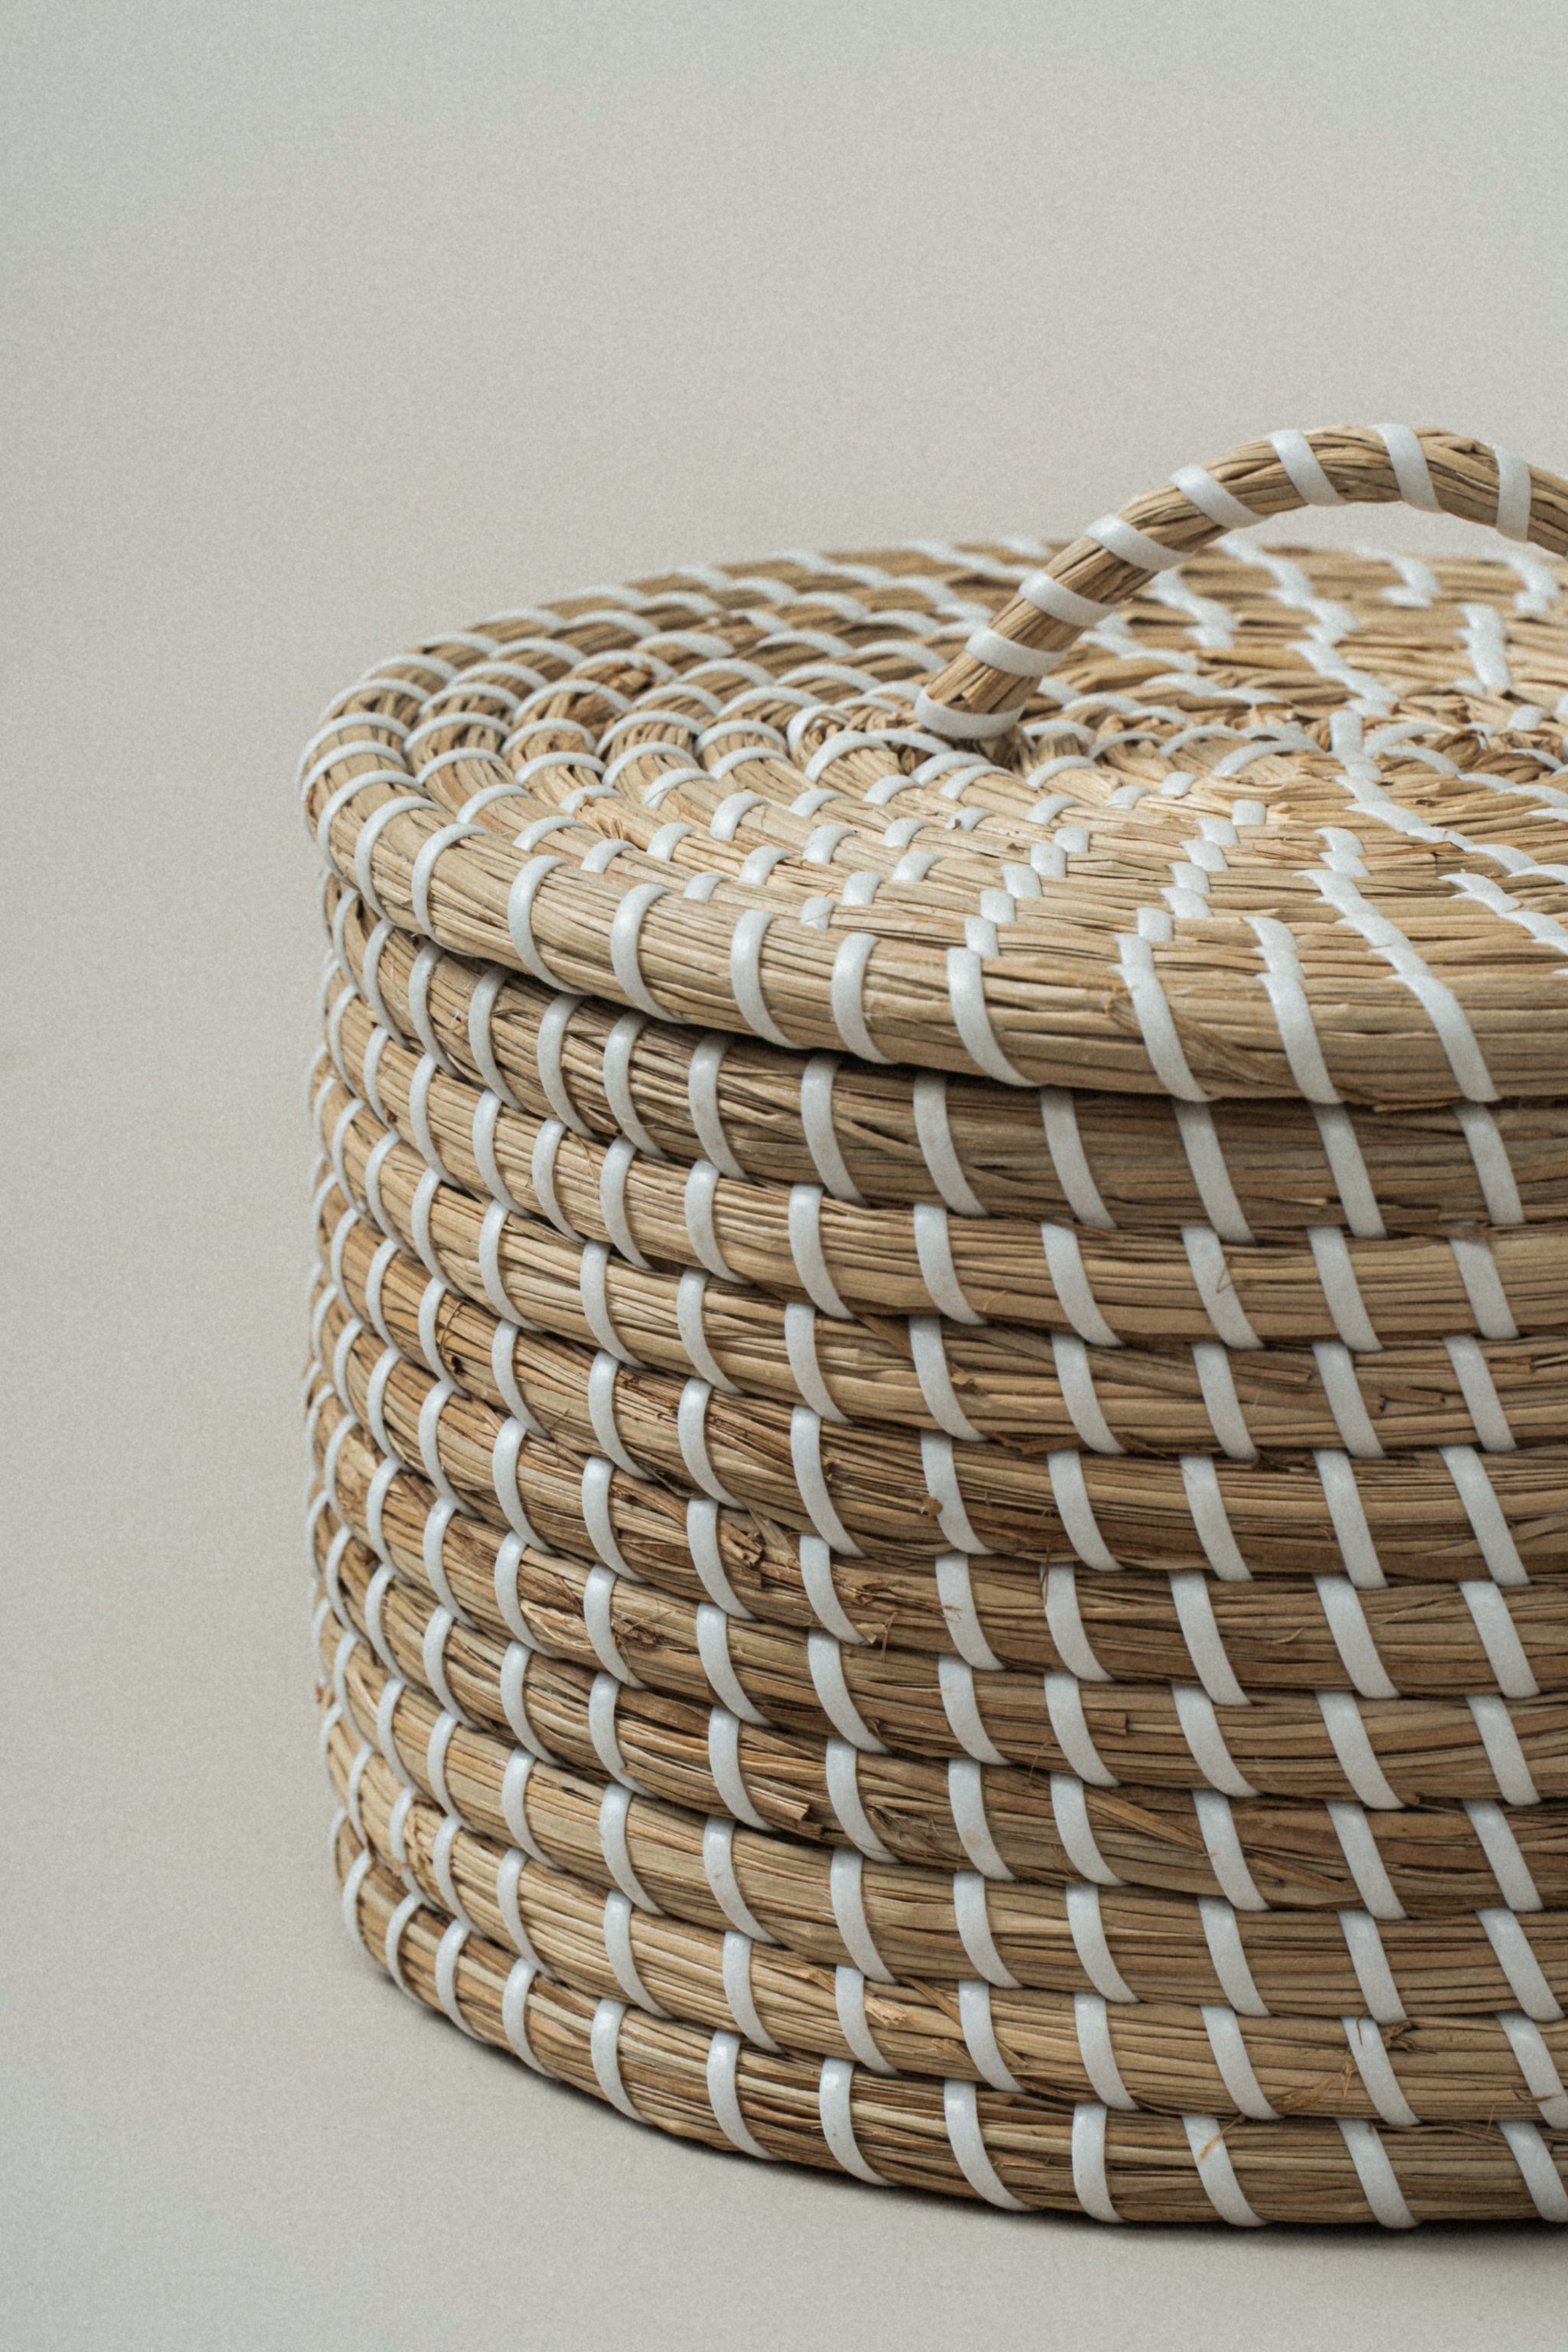 Medina Seagrass Woven Canister - Medina Seagrass Woven Canister